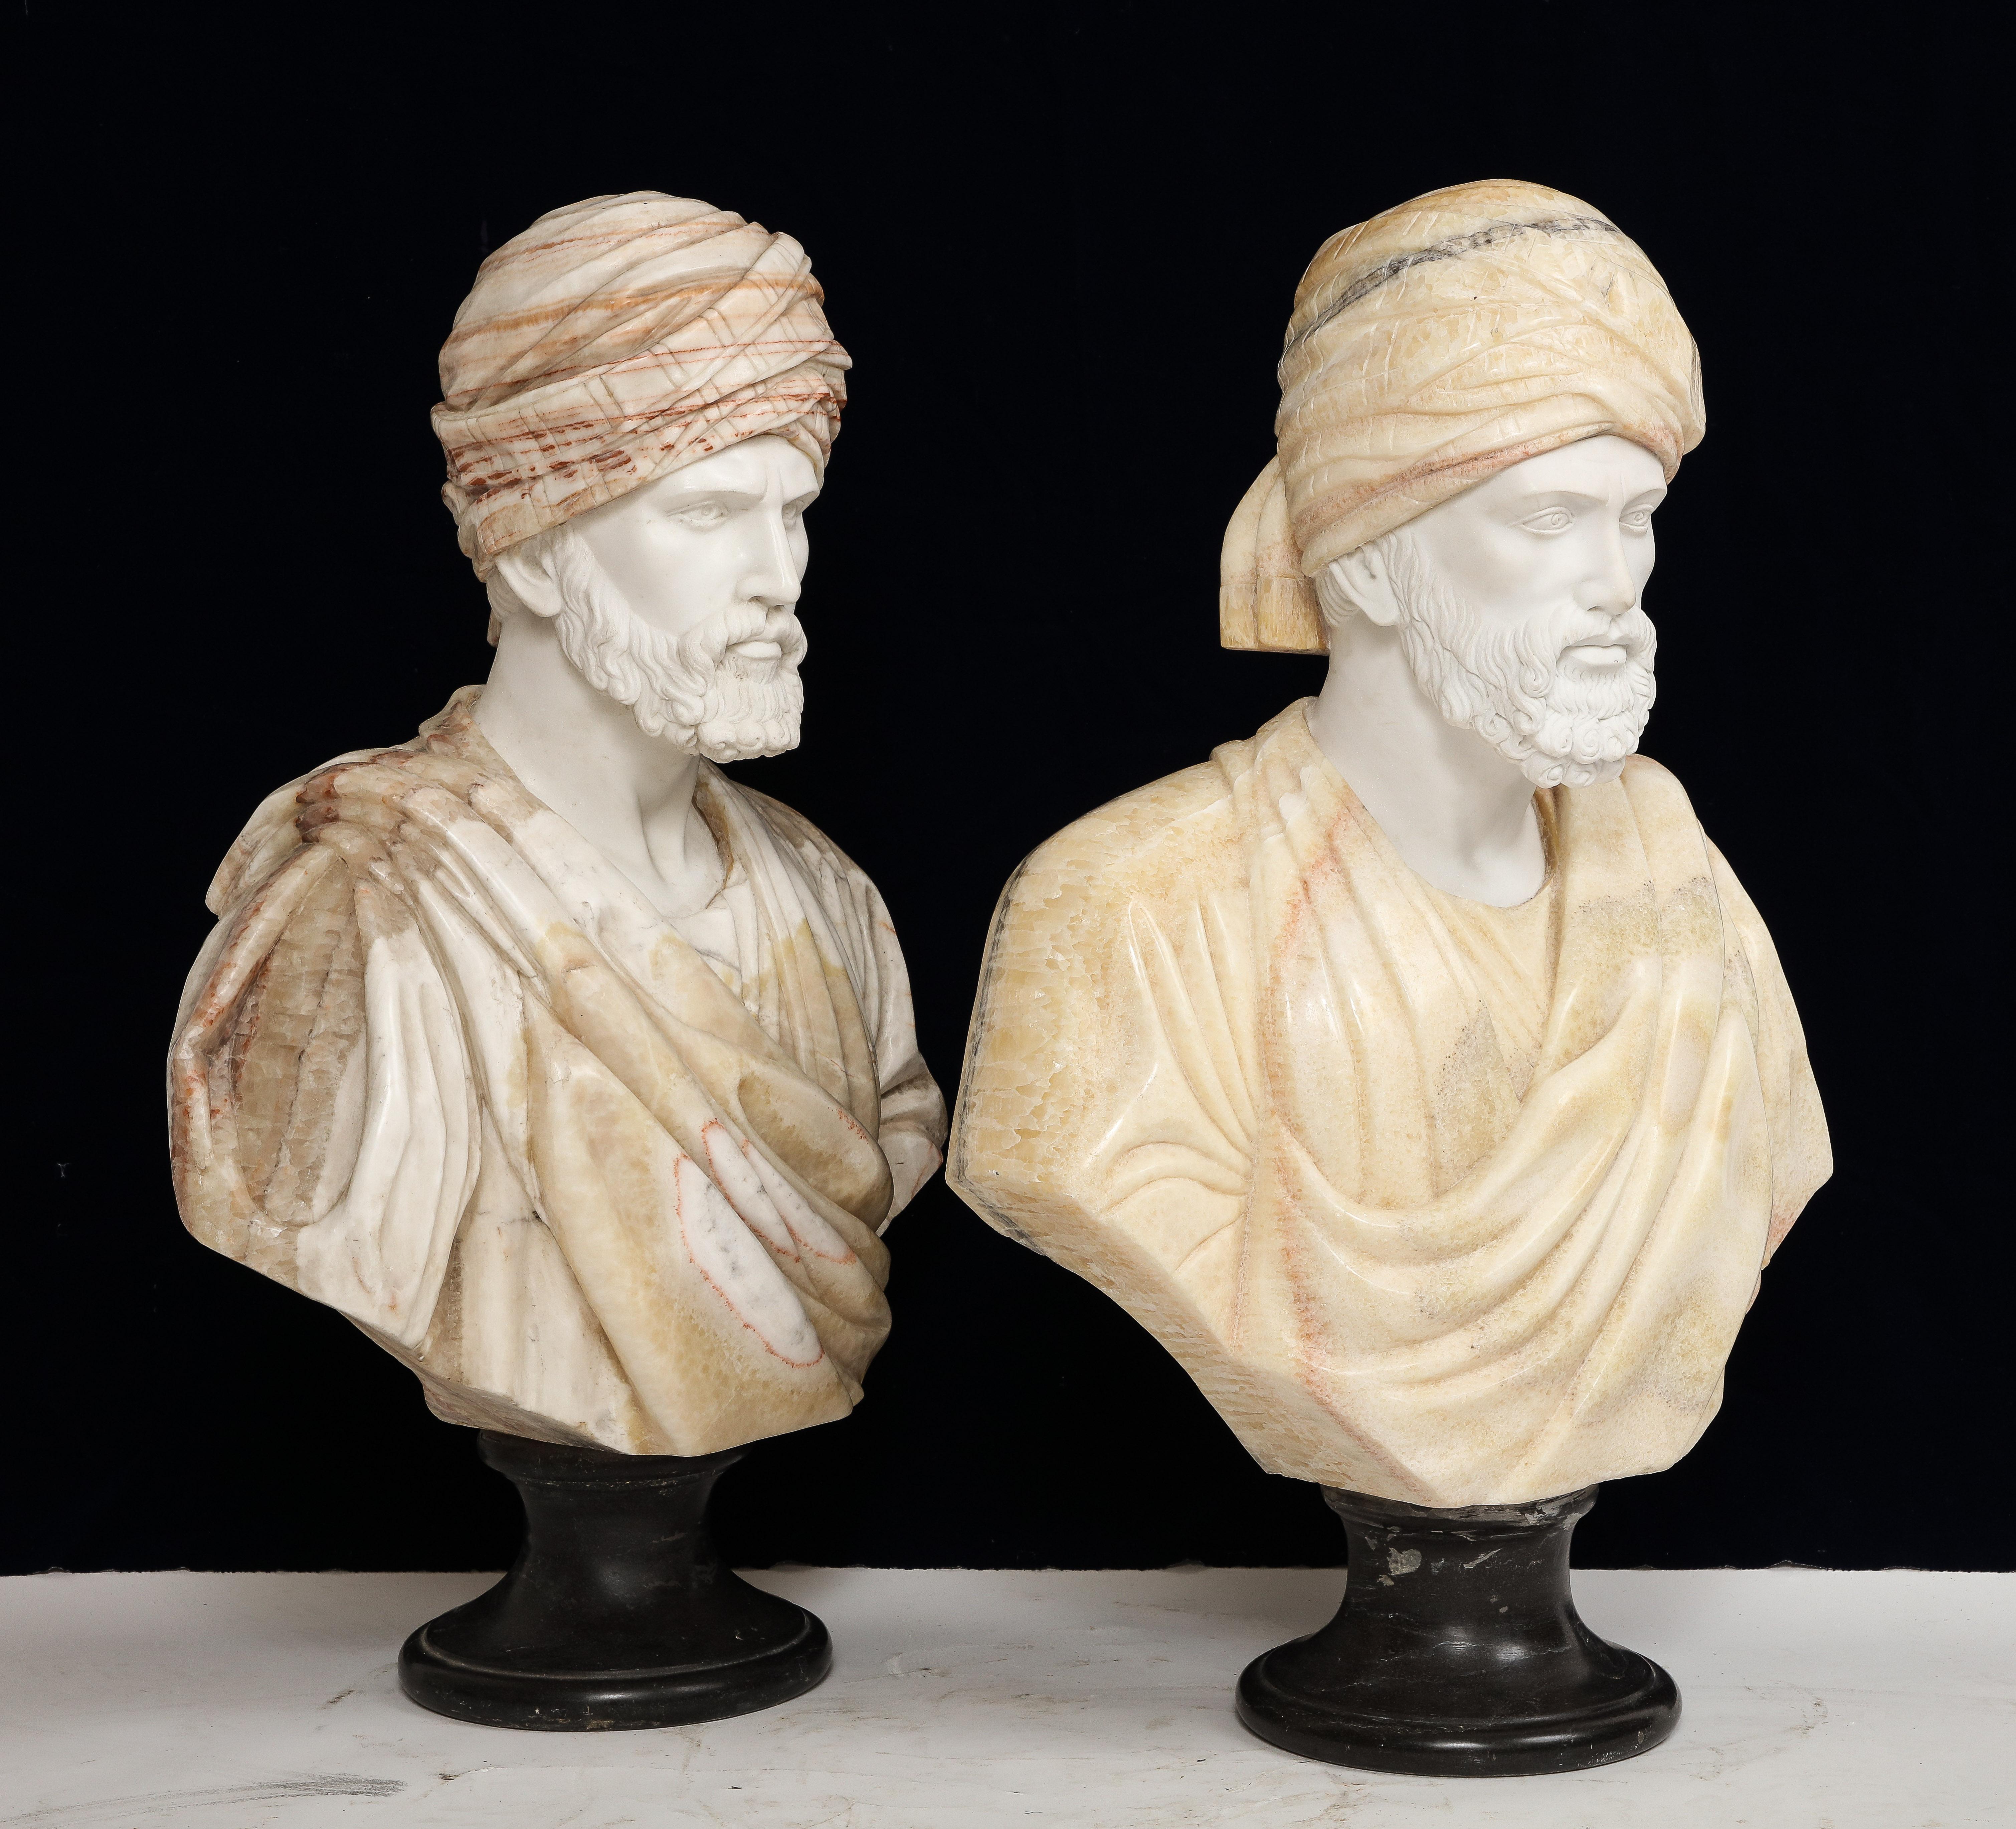 An Unusual Pair of Italian Hand-Carved Marble & Onyx Busts of Orientalist Royalties, 1900s

Adorned with captivating details and expert craftsmanship, this extraordinary pair of Italian marble bust sculptures stands as a testament to the timeless